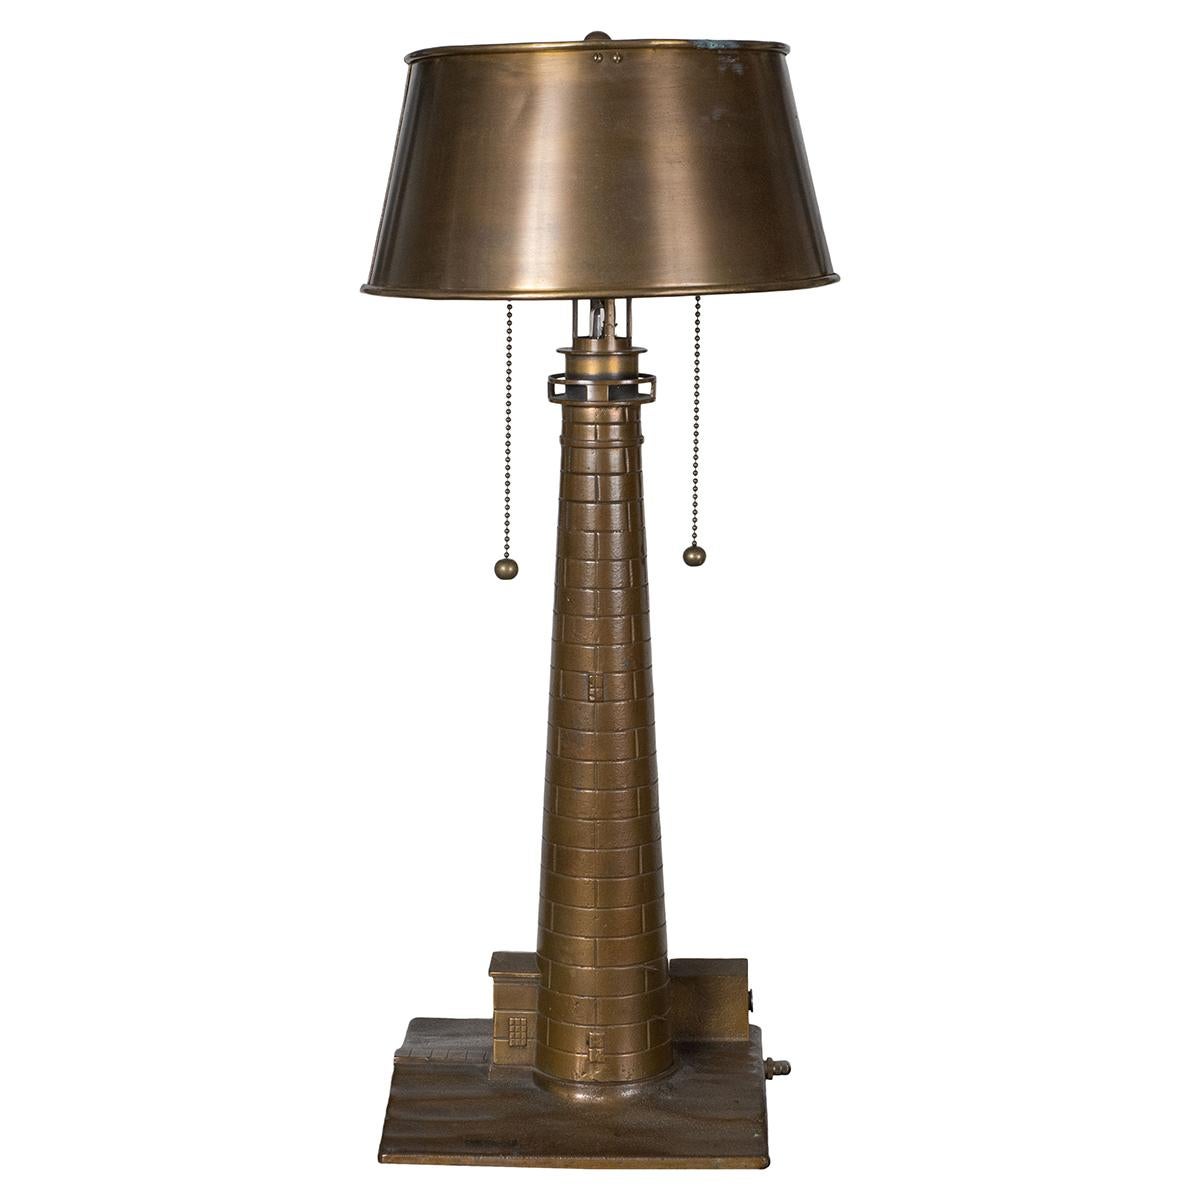 Cast bronze lighthouse table lamp with original metal shade. Features pull chain switches and base switch that controls a smaller central light.